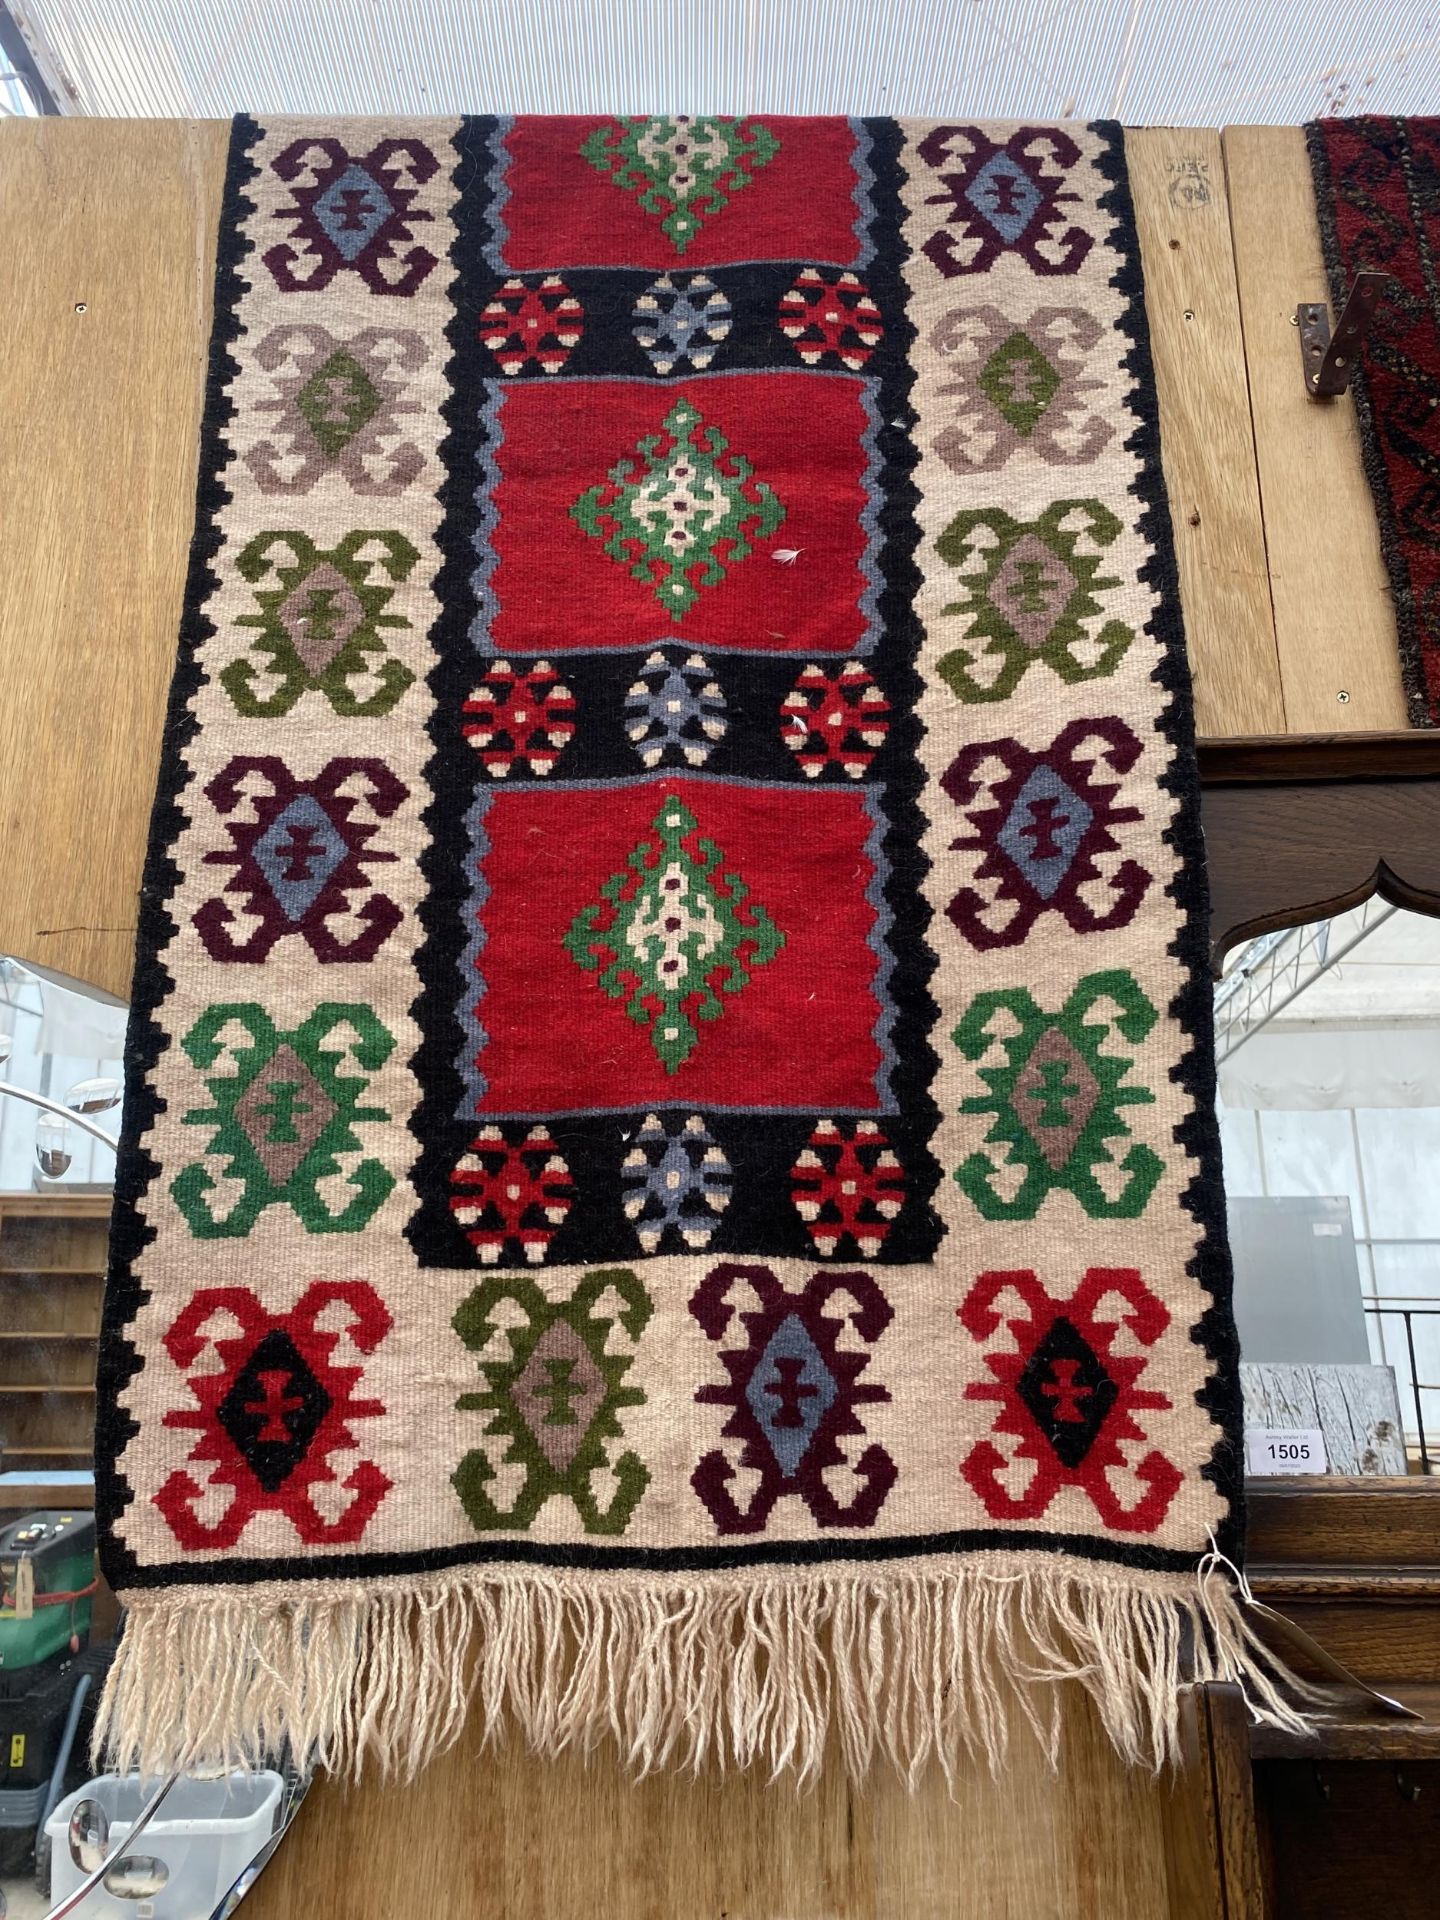 A RED AND CREAM PATTERNED FRINGED RUG